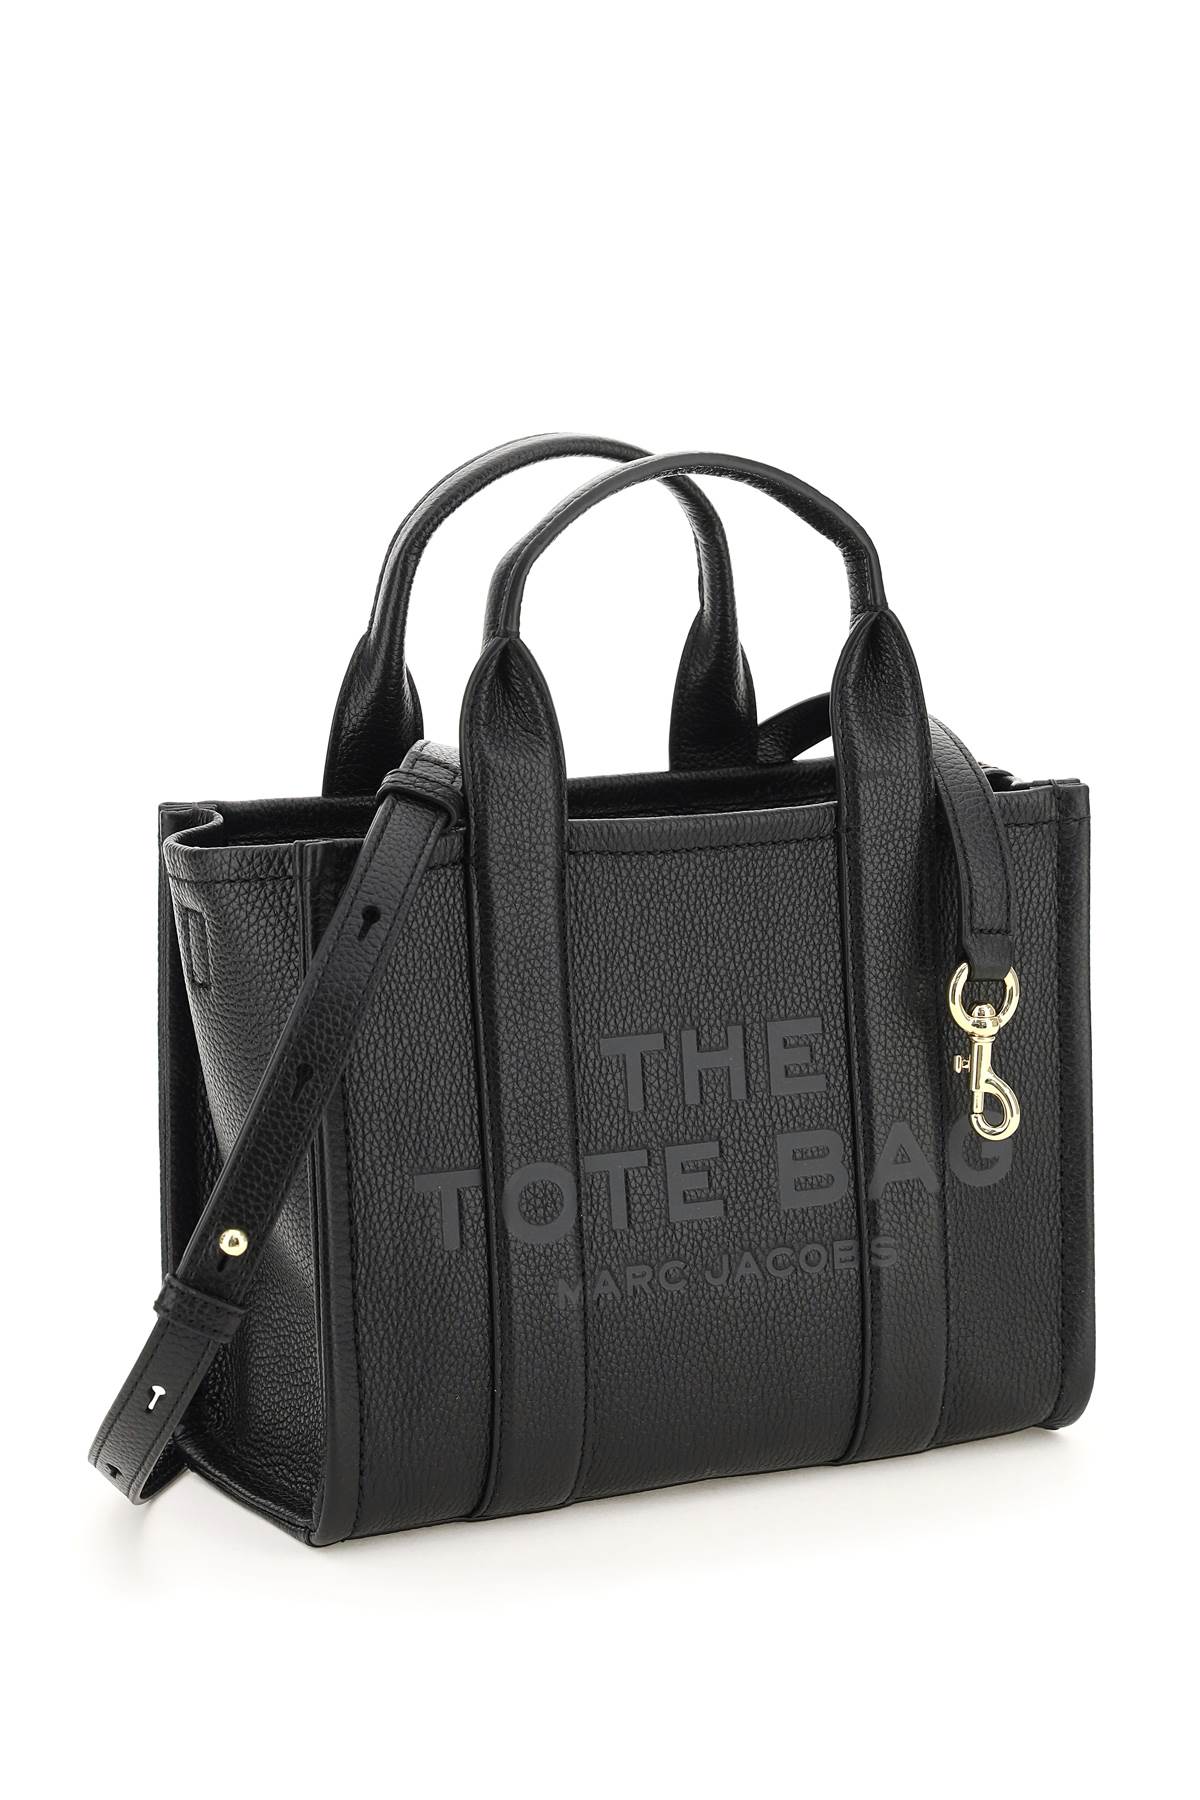 Borsa The Leather Small Tote Bag - Marc Jacobs - Donna